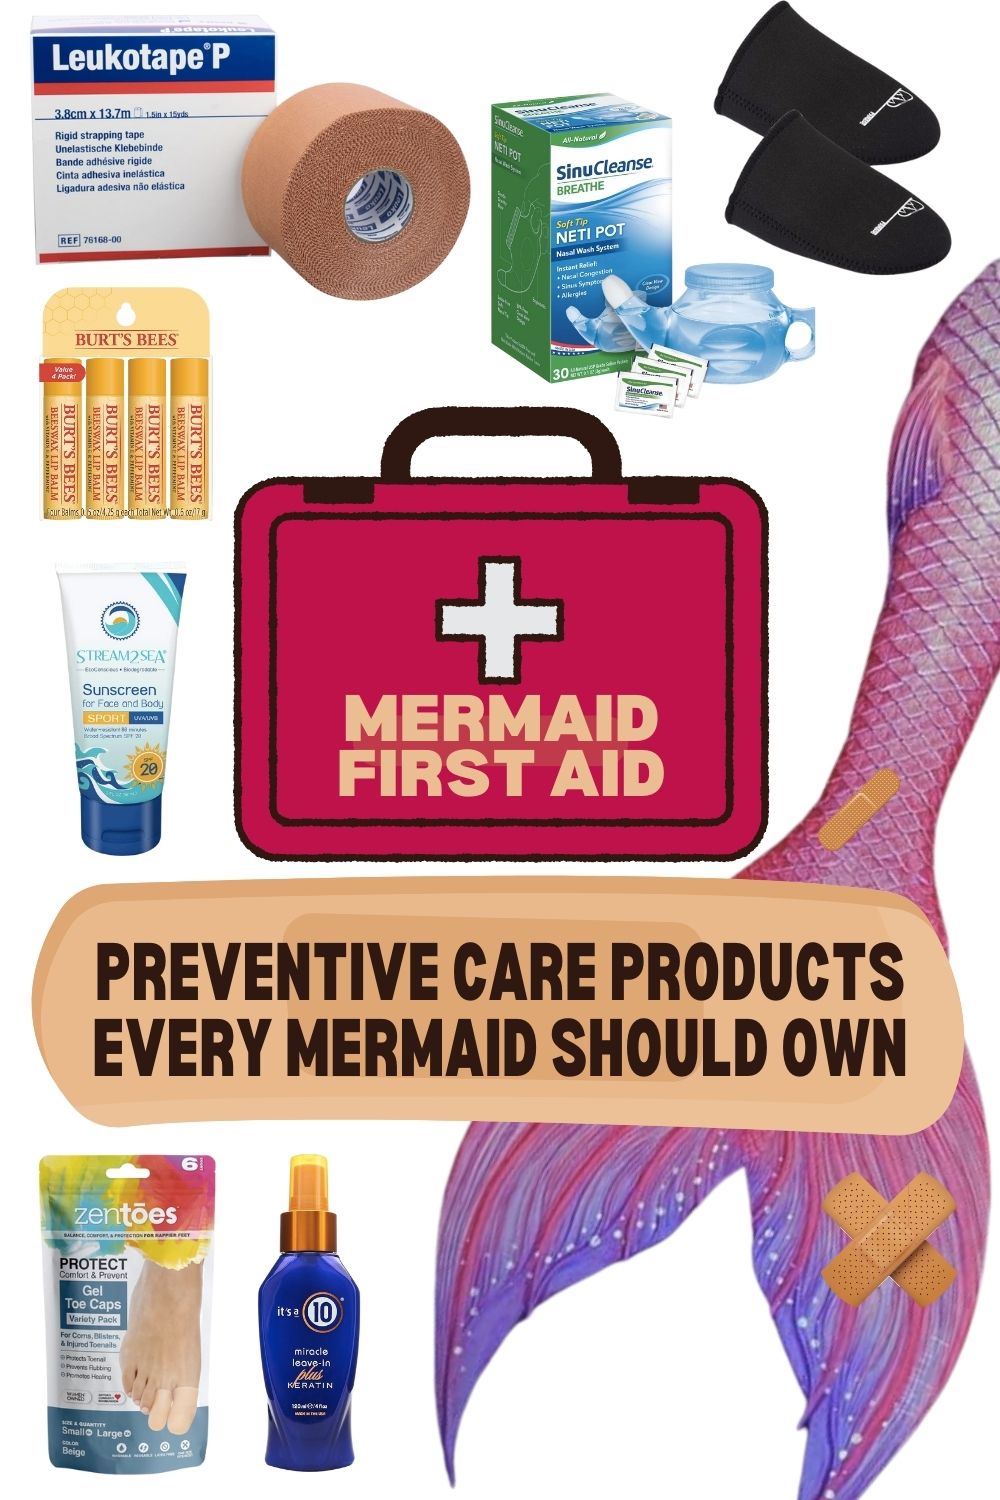 Mermaid First Aid- Blister prevention, sinus savers, and more!